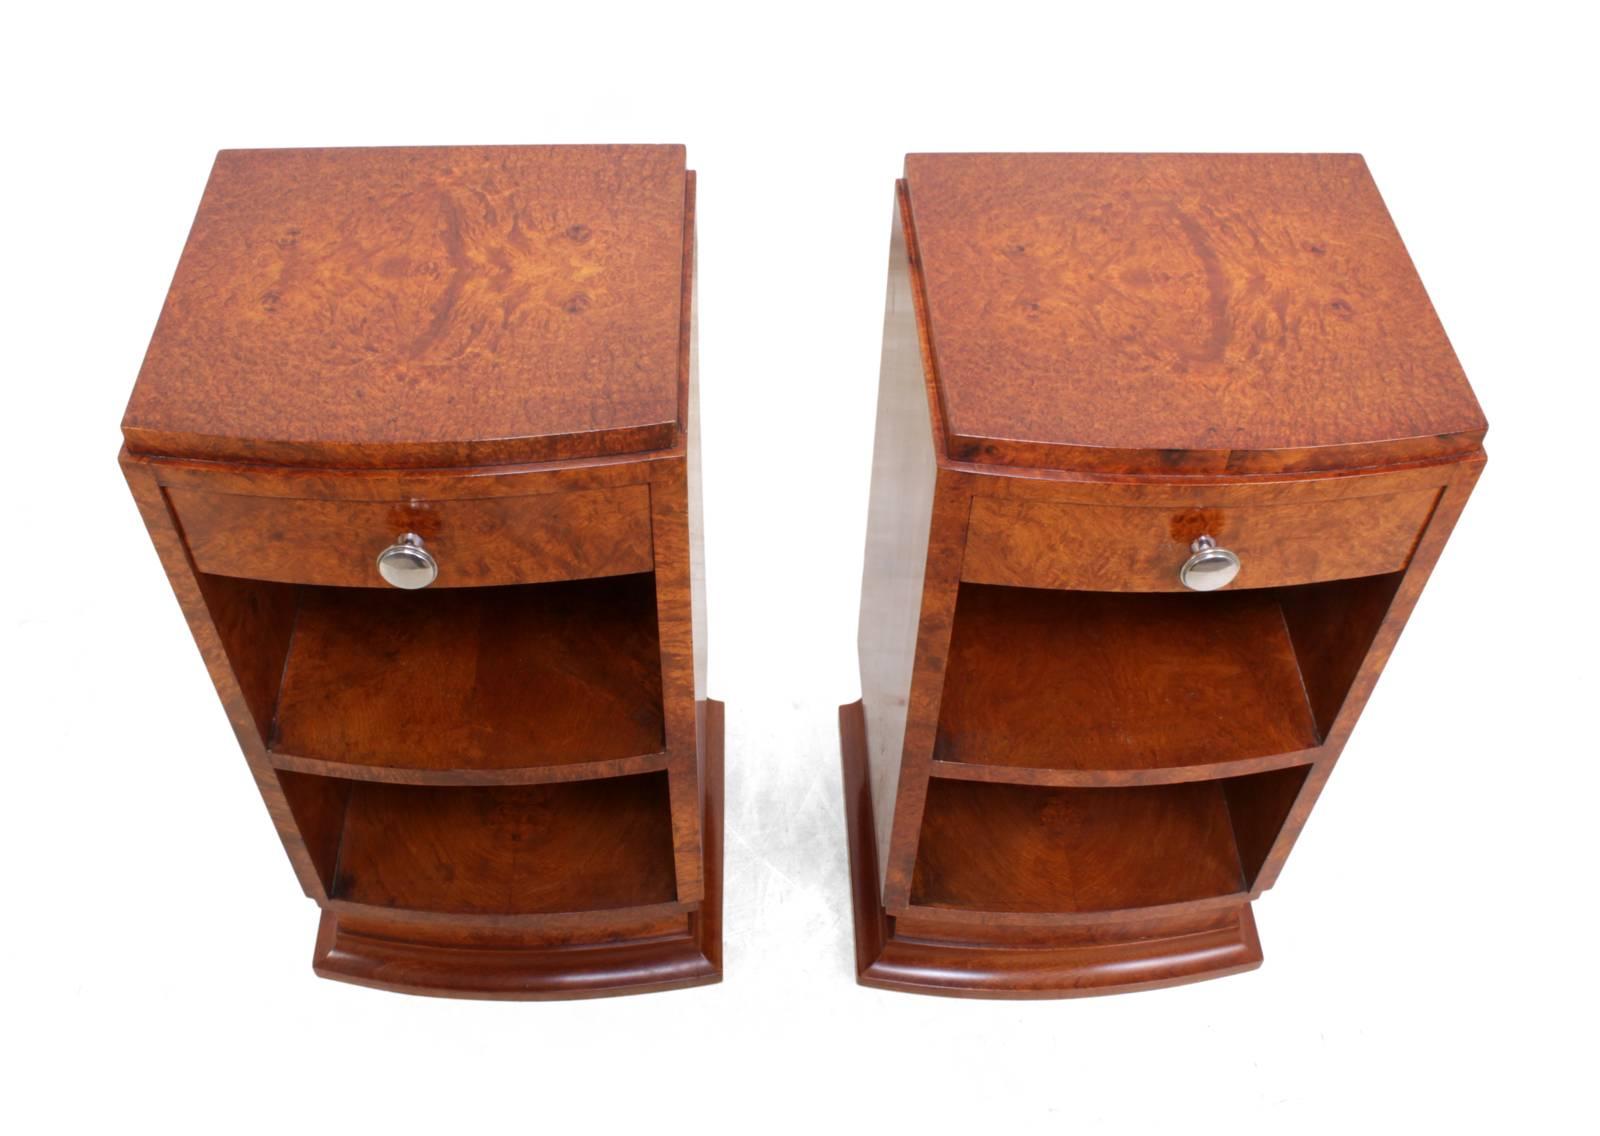 Art Deco bedside cabinets in amboyna
A pair of French Art Deco bedside tables with single drawer and shelf below these bedsides have been professionally restored and hand polished

Age: 1930

Style: Art Deco

Material: Amboyna

Condition: